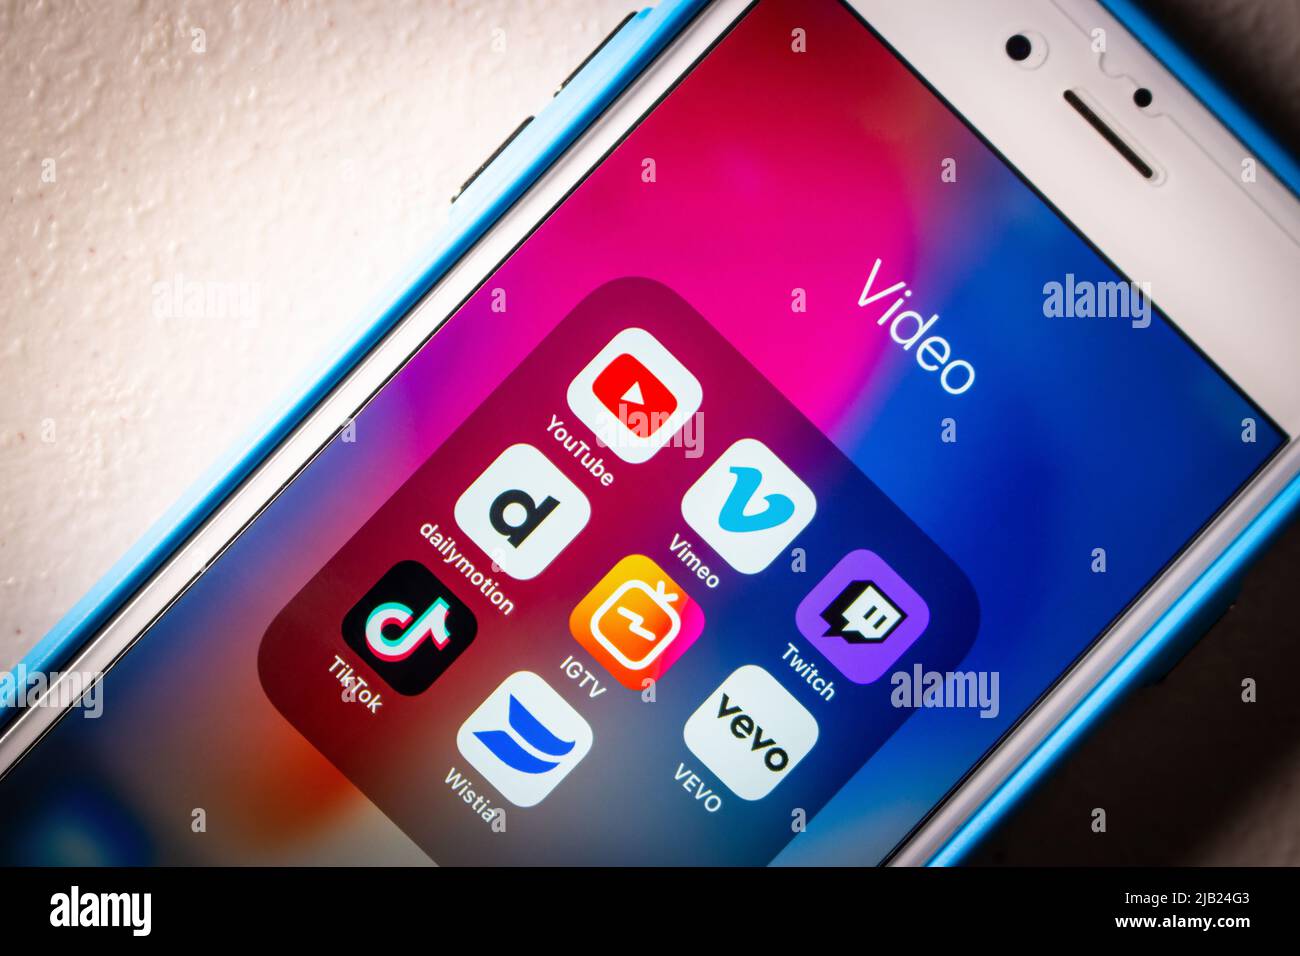 YouTube and competitors or alternatives (Vimeo, Twitch, Dailymotion, IGTV, Vevo, TikTok and Wistia) on an iPhone in a dark mood